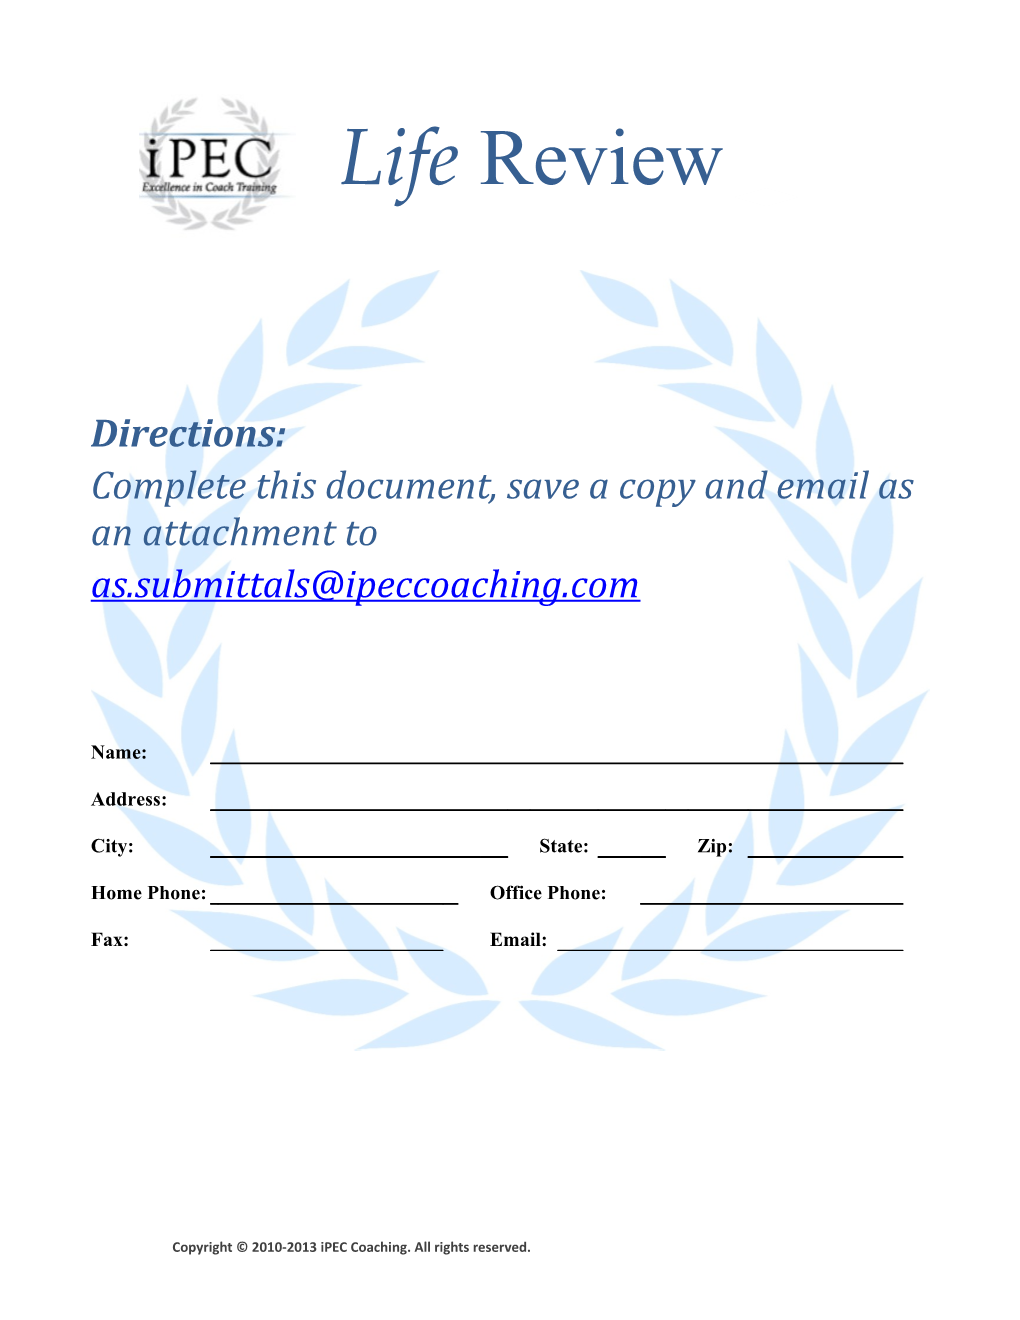 Complete This Document, Save a Copy and Email As an Attachment To